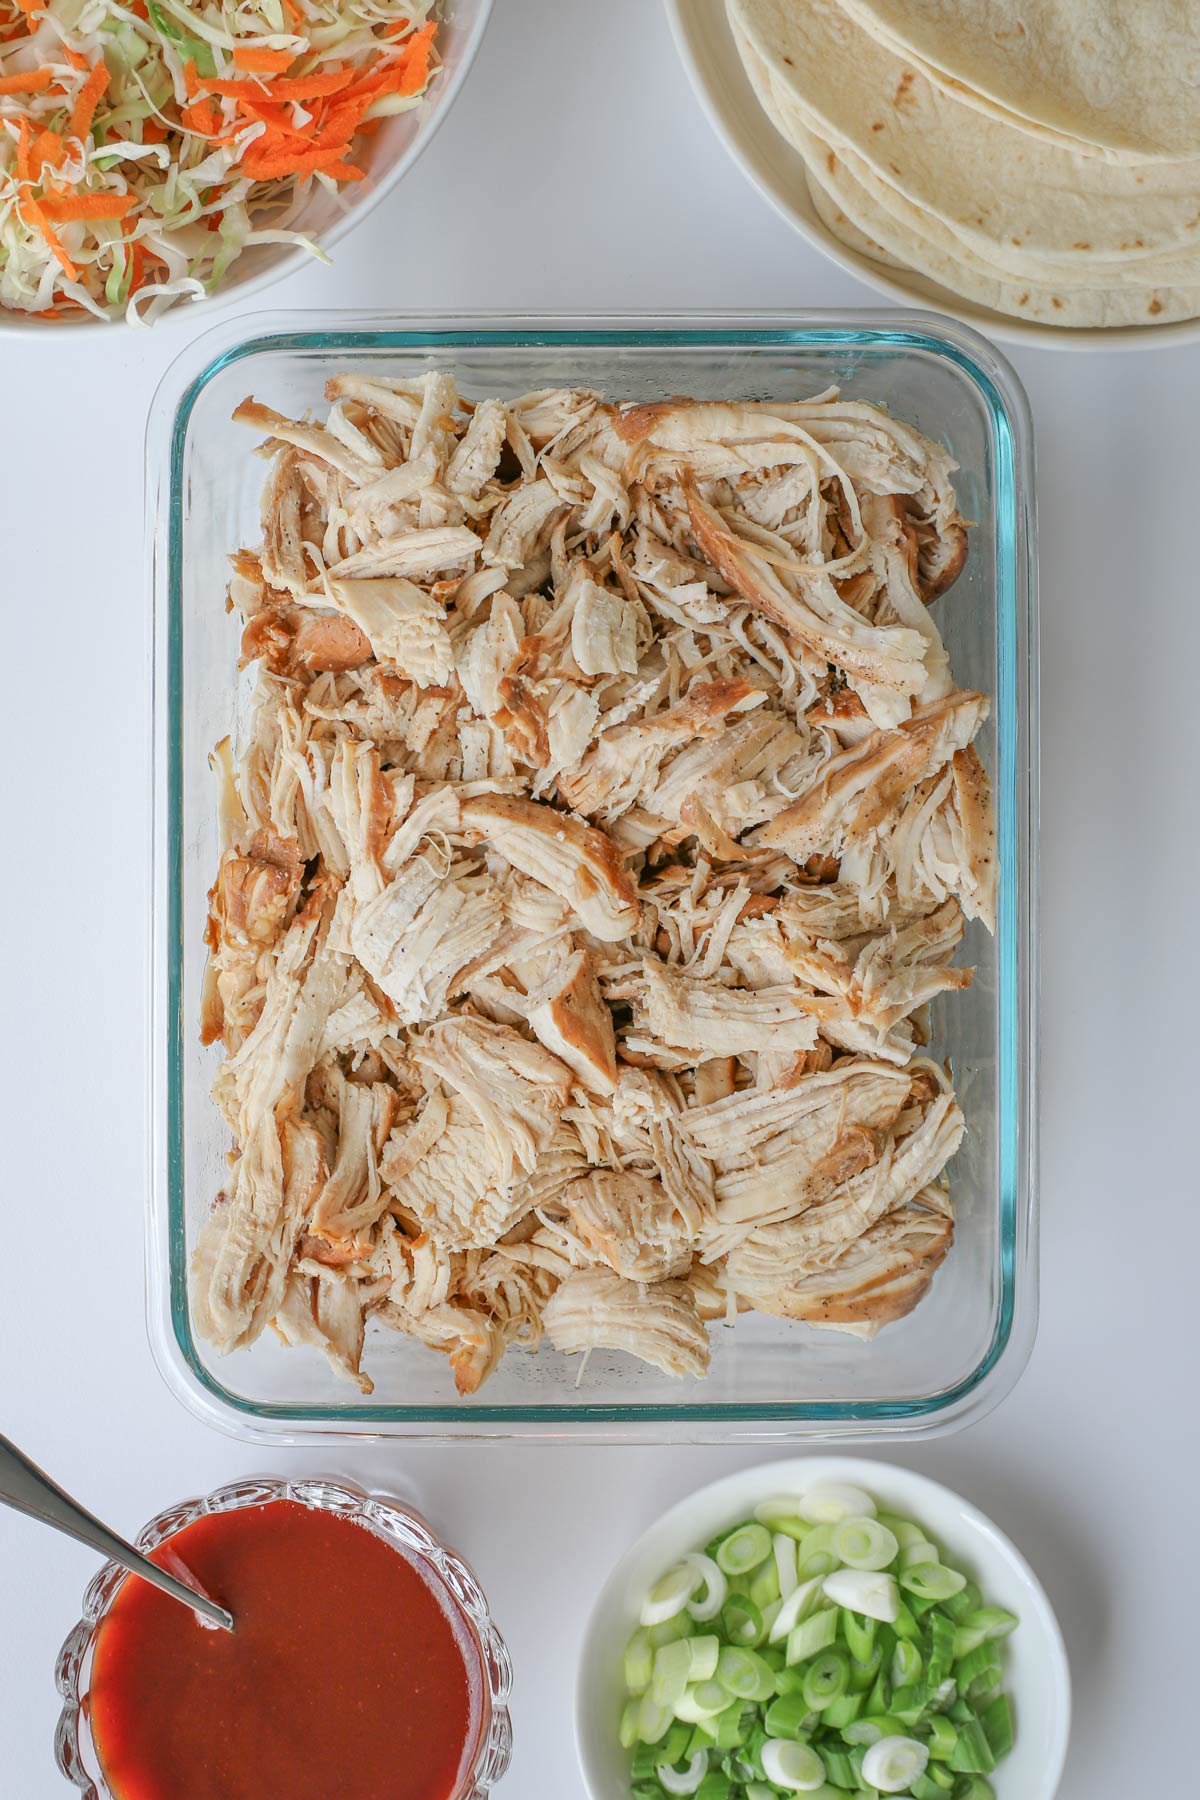 cooked shredded chicken in a glass dish with moo shu elements on dishes surrounding it.